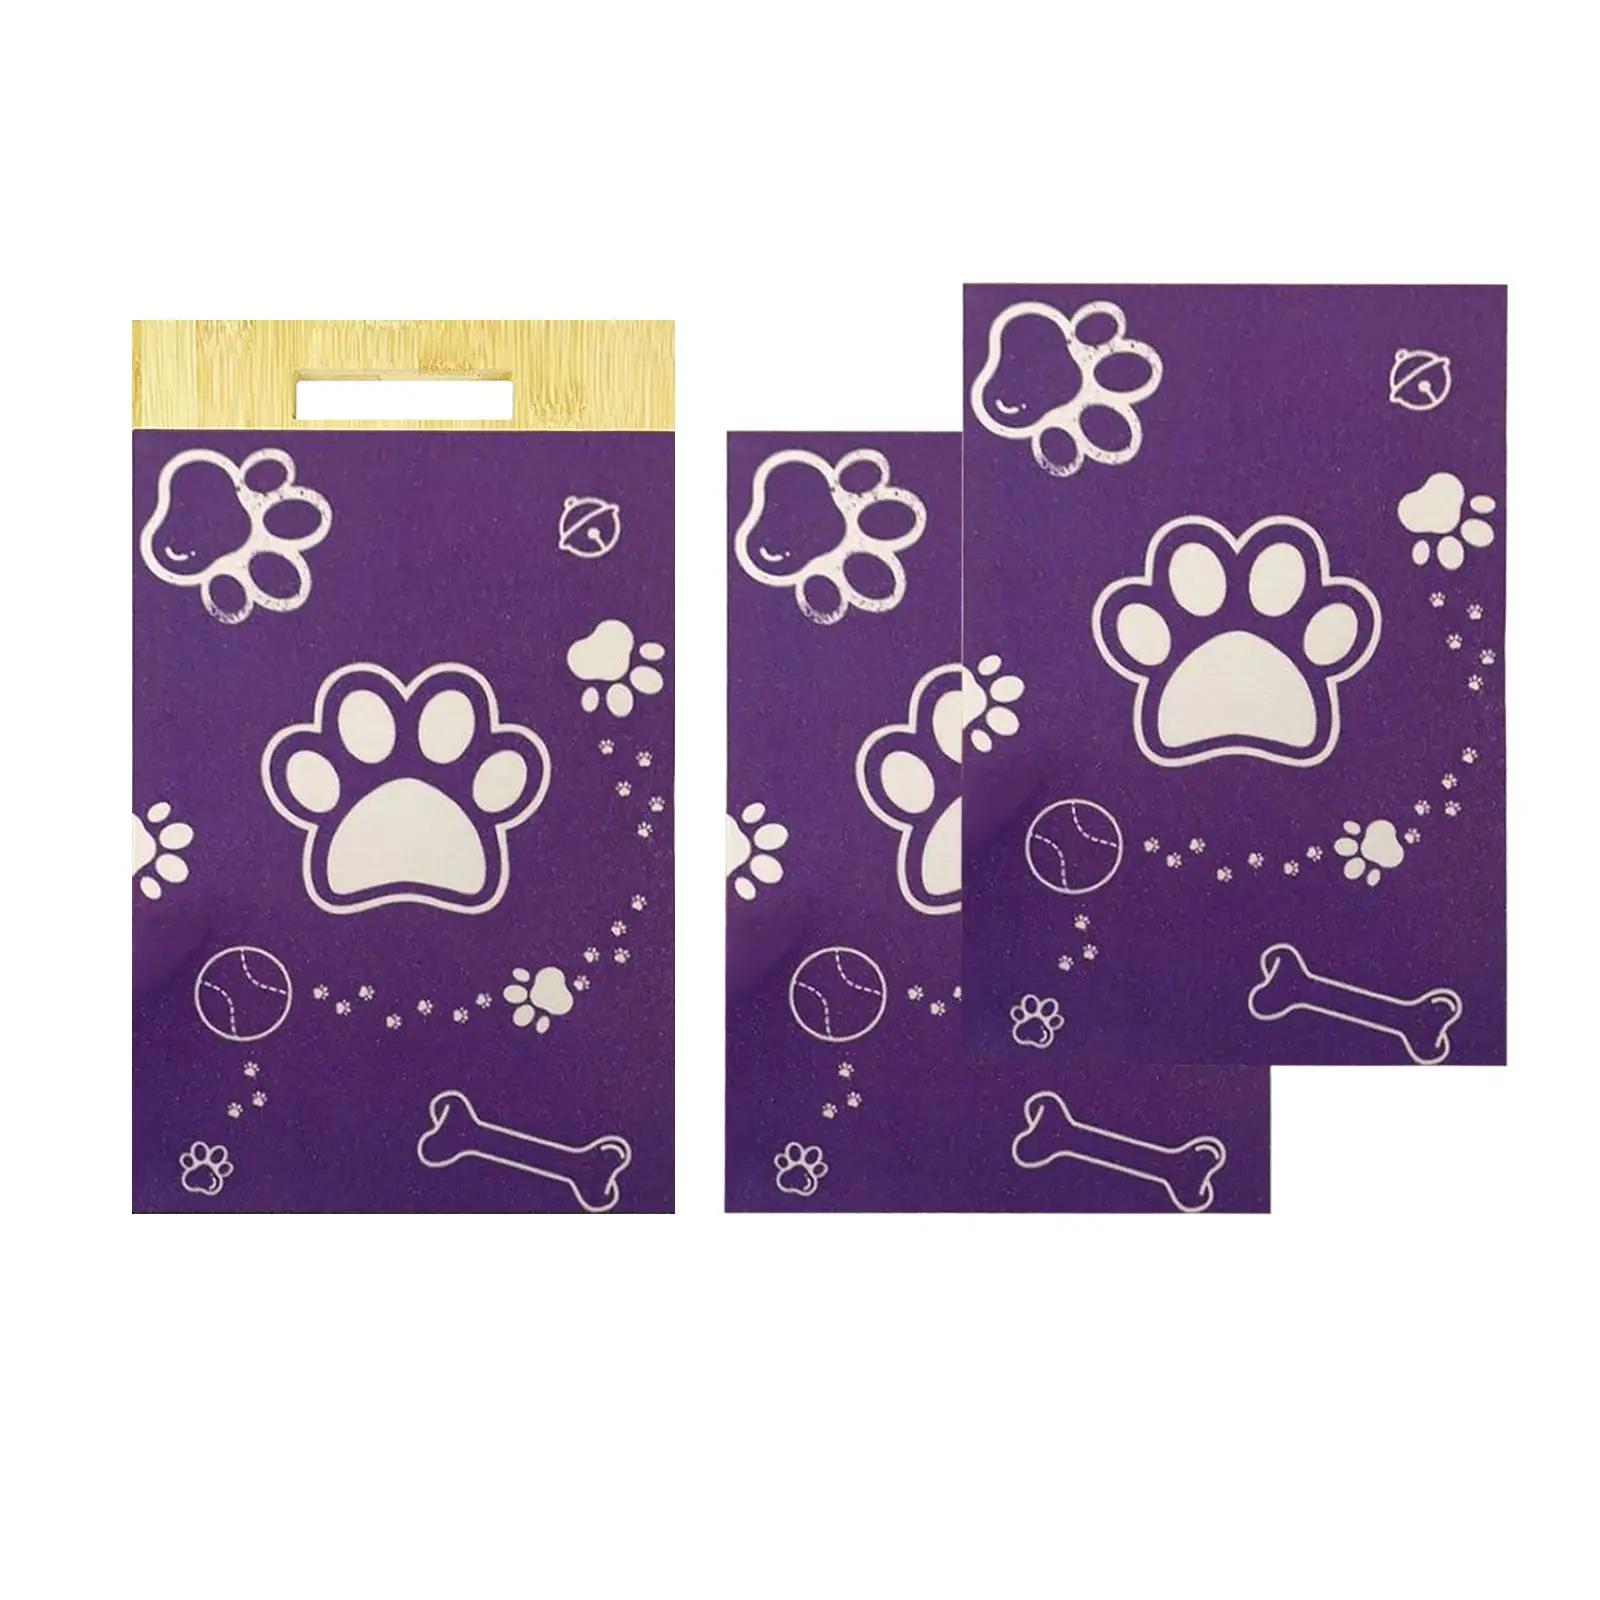 Dog Scratch Pads, Pet Nail File Cat Nail Trimmer for Doggy, Kitty, Kitten, Indoor Cats, Small Medium Dogs